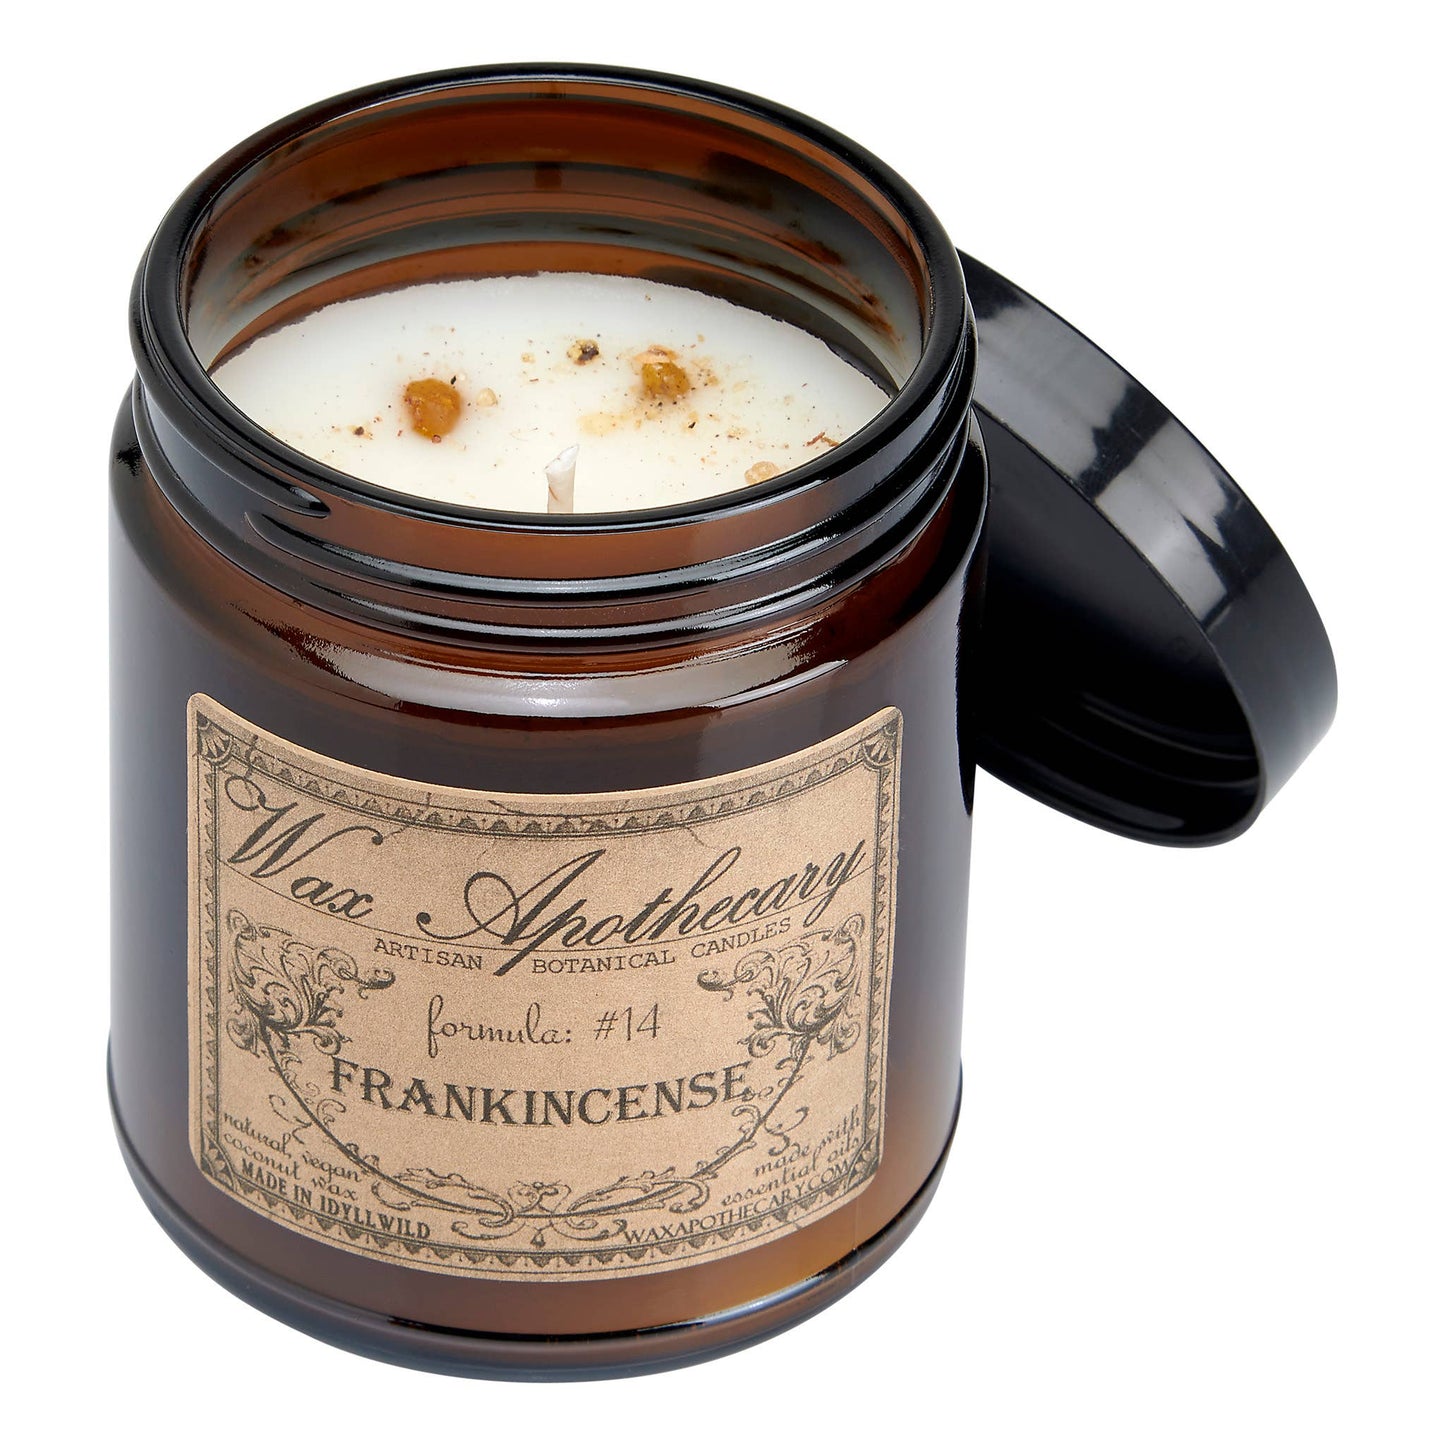 6oz Botanical Candle in Amber Glass Jar - Choose A Scent: French Lavender